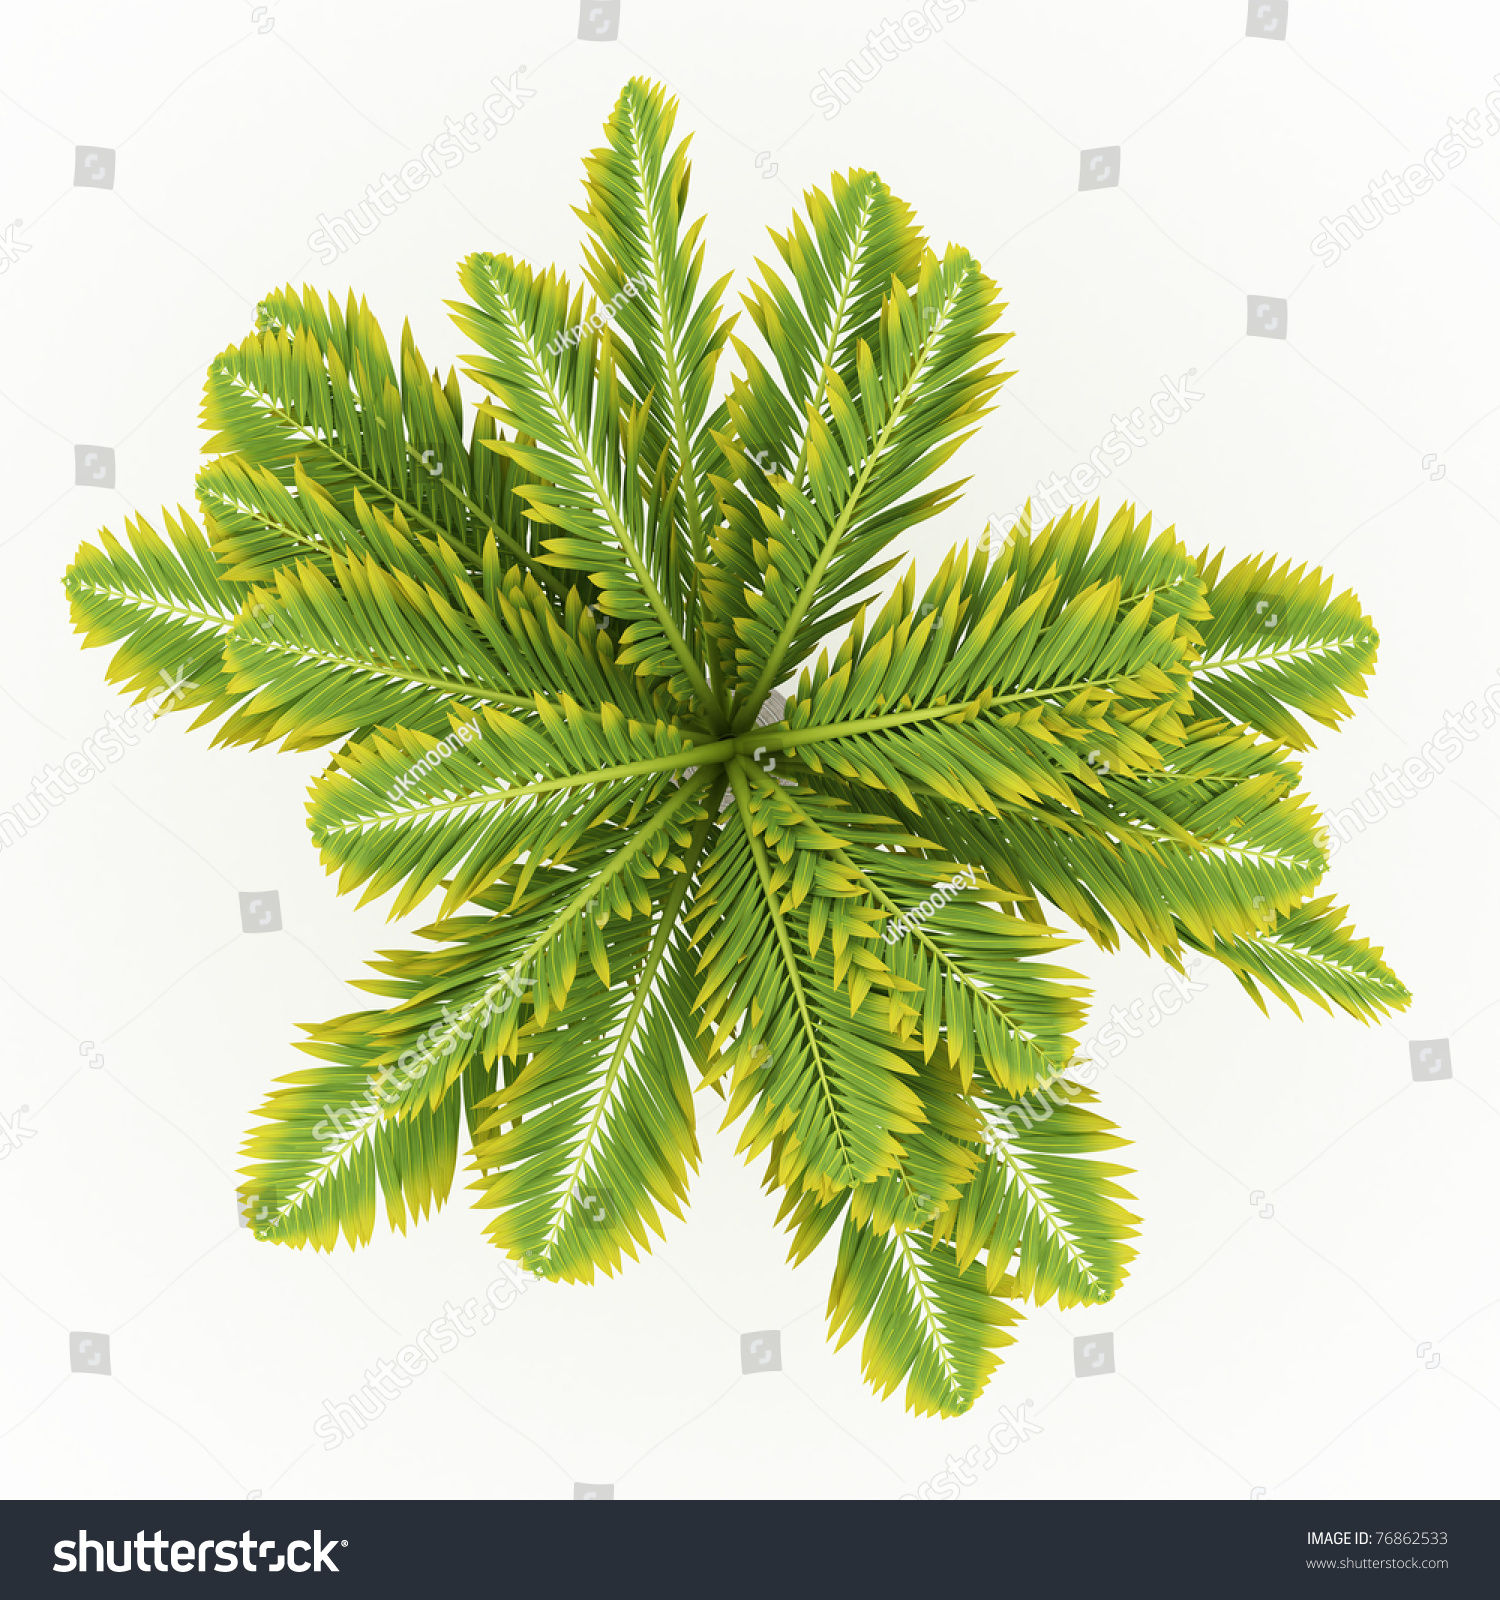 Top View Palm Tree Isolated Over Stock Illustration 76862533 ...